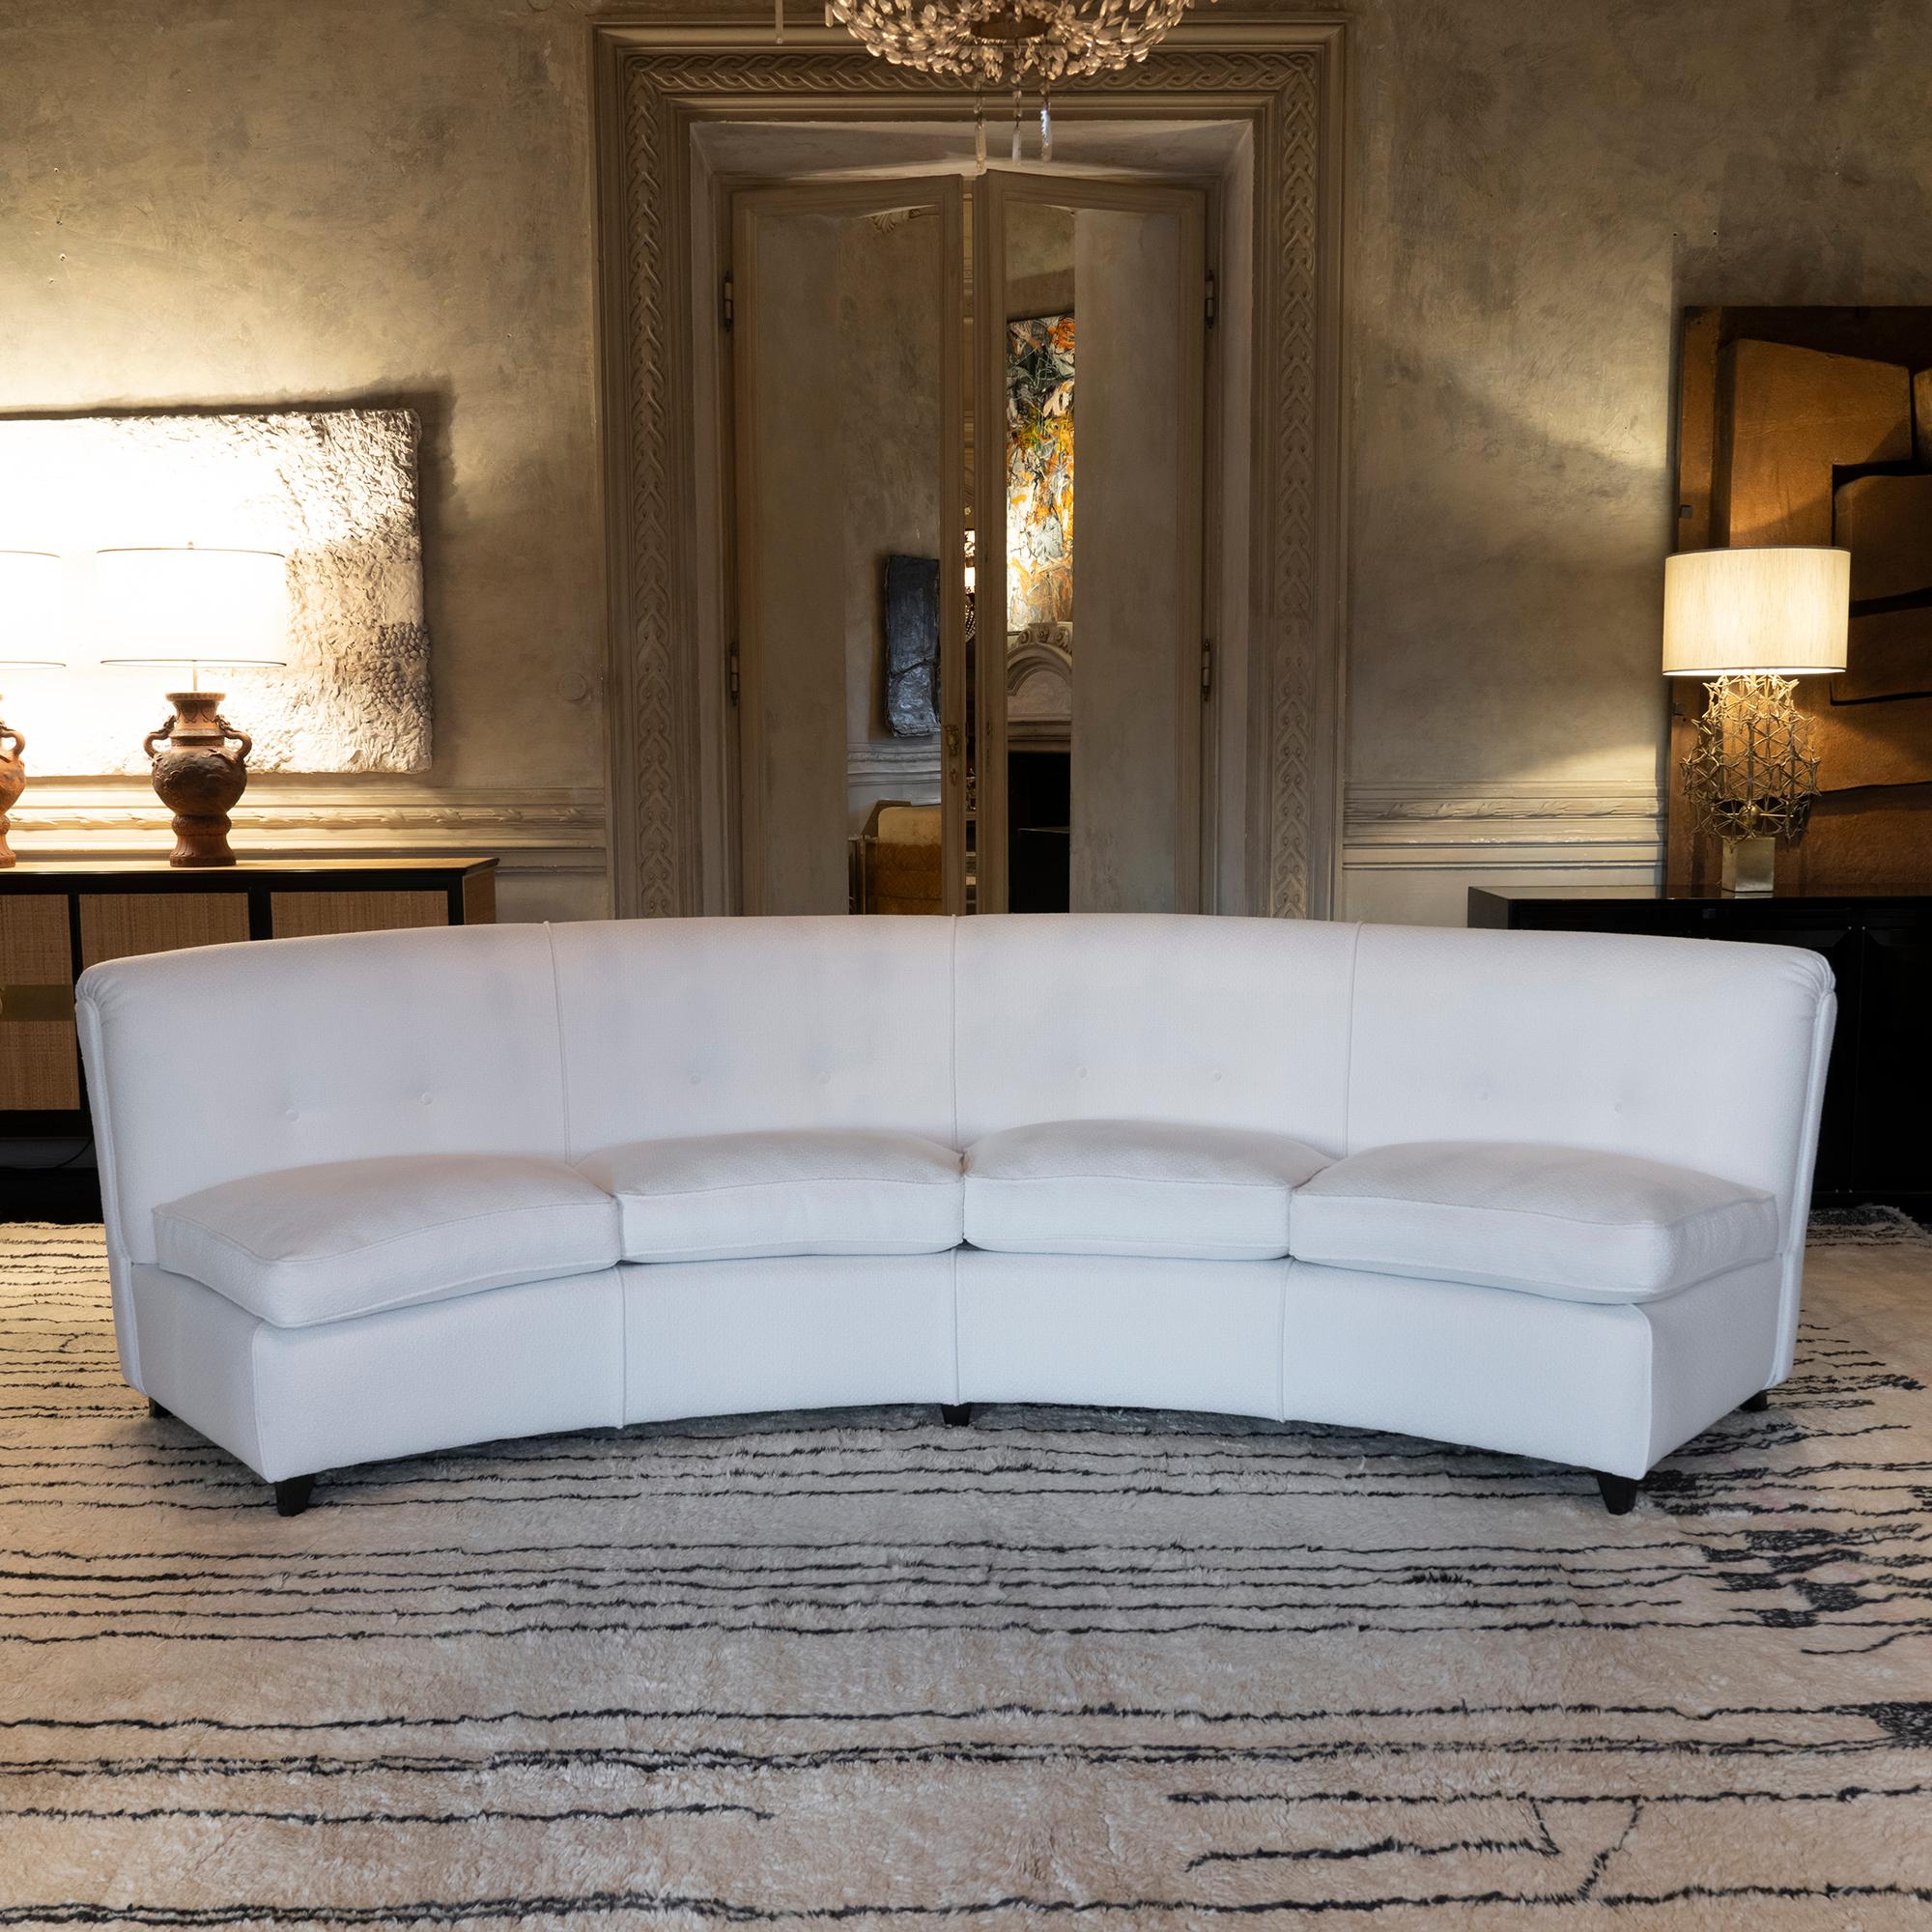 Curved sofa newly reupholstered in white woven jacquard fabric, seat cushions in goose feathers, details in black wood, Italy 1950's circa.